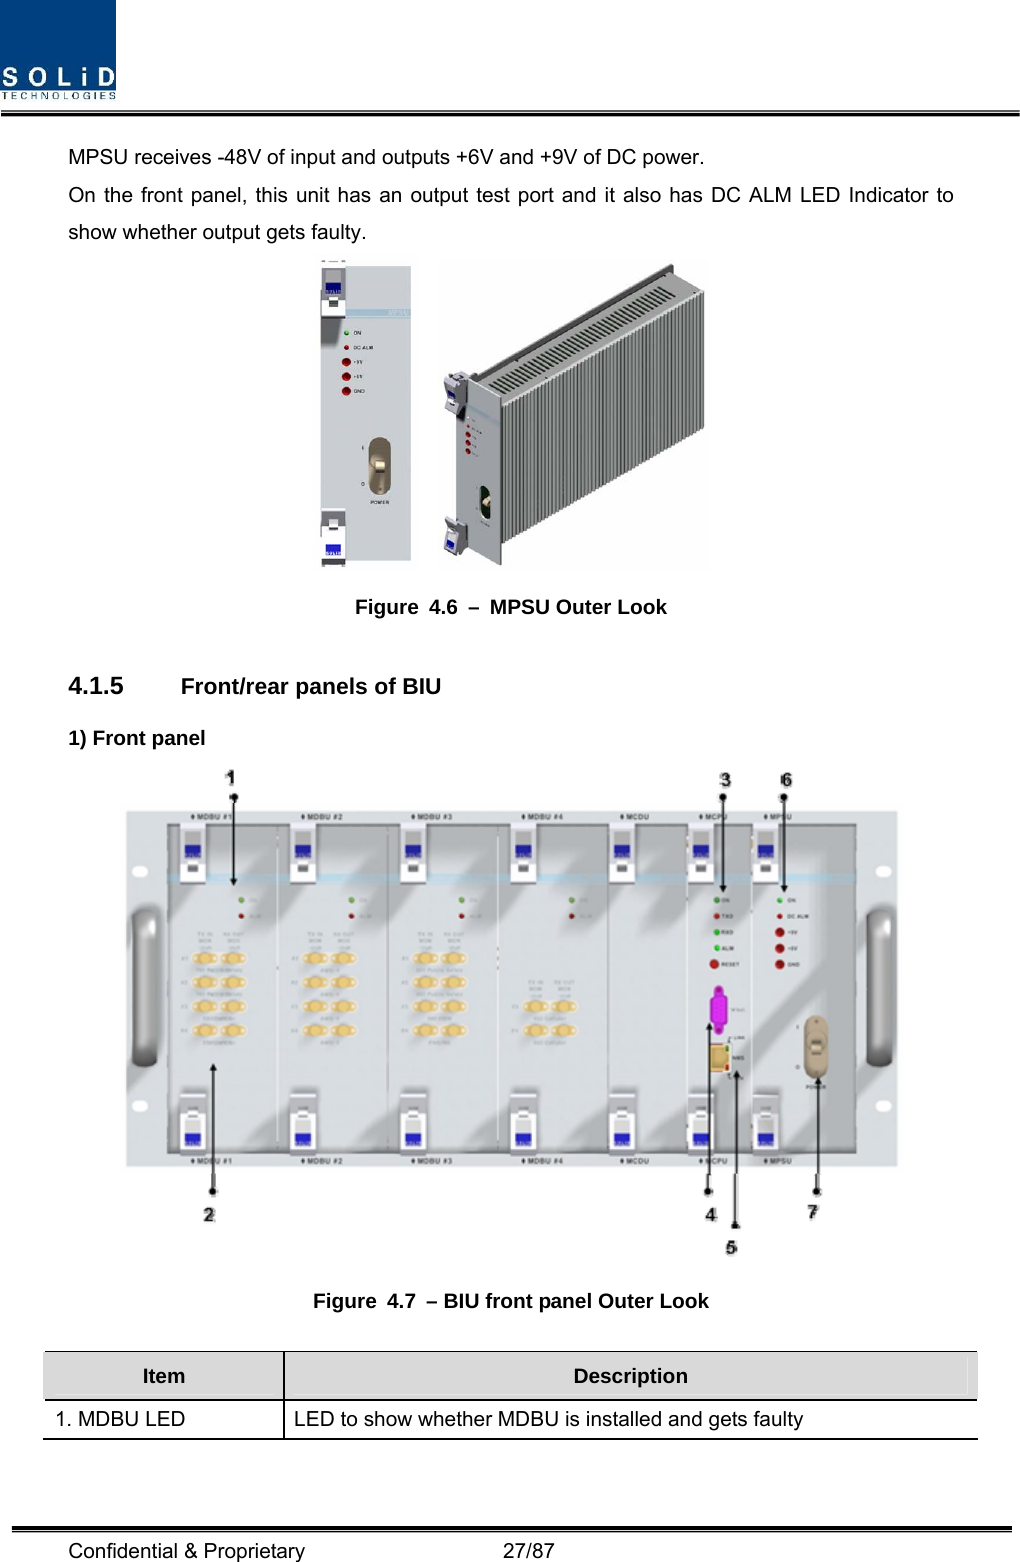  Confidential &amp; Proprietary                   27/87 MPSU receives -48V of input and outputs +6V and +9V of DC power. On the front panel, this unit has an output test port and it also has DC ALM LED Indicator to show whether output gets faulty.     Figure 4.6 – MPSU Outer Look  4.1.5  Front/rear panels of BIU 1) Front panel  Figure  4.7  – BIU front panel Outer Look  Item  Description 1. MDBU LED  LED to show whether MDBU is installed and gets faulty 